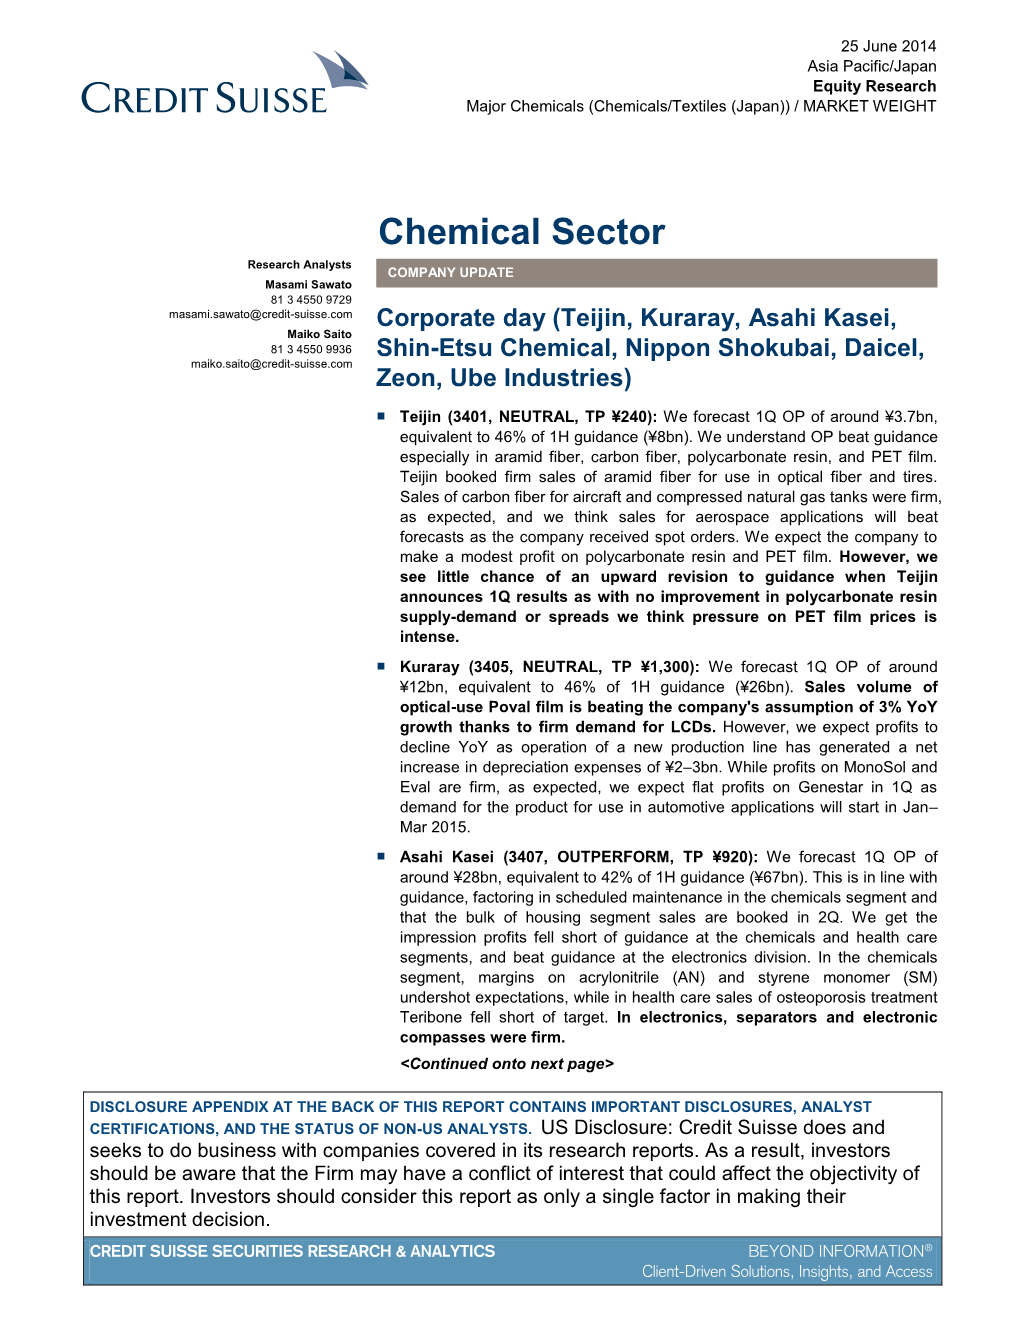 Chemical Sector Research Analysts COMPANY UPDATE